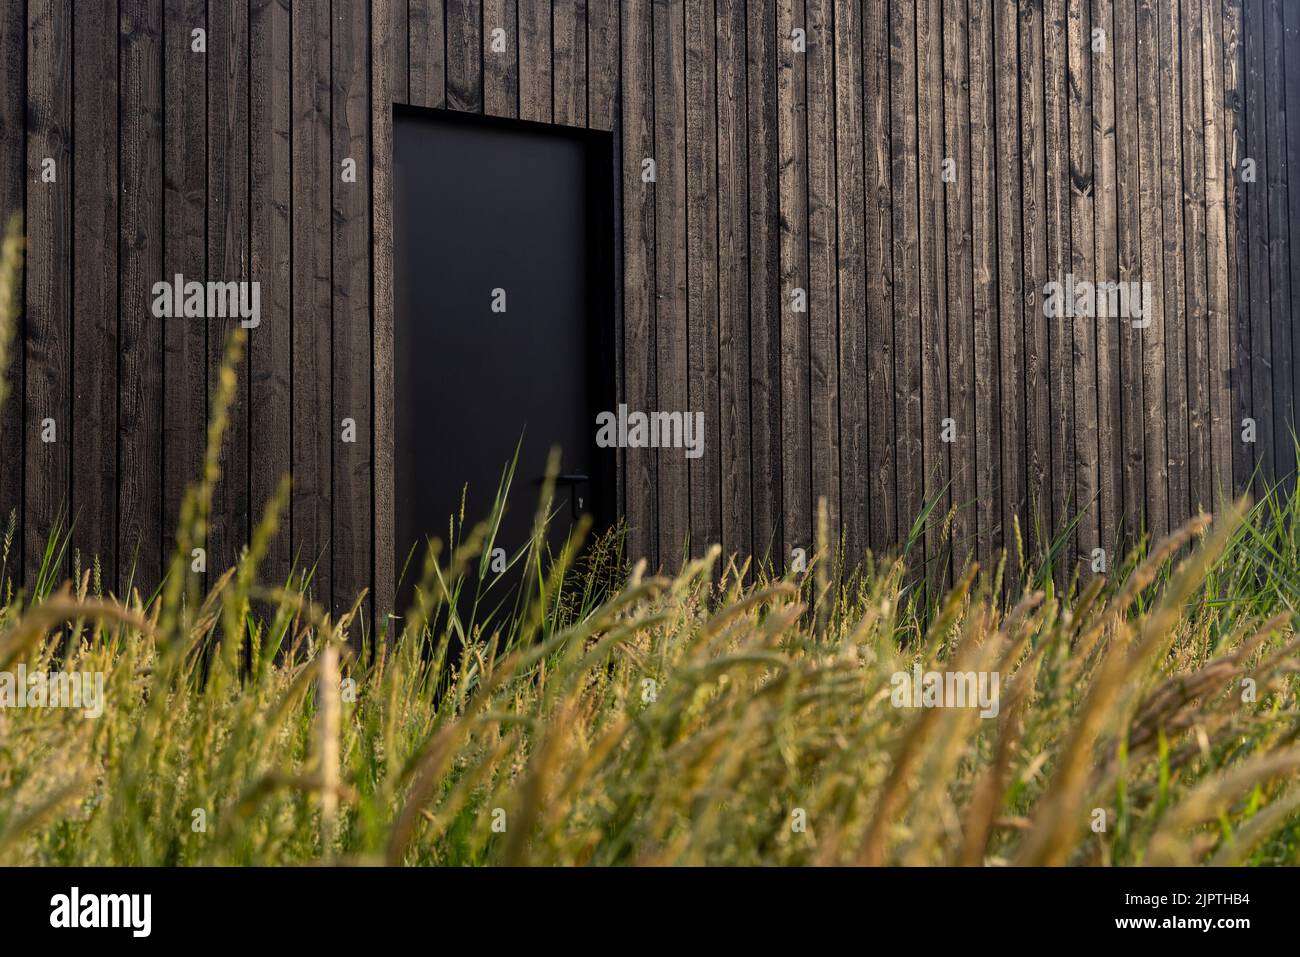 Black wooden house with black door, soft green grass and sedges. Plain Nordic or Scandinavian architecture, wooden wall texture, background Stock Photo